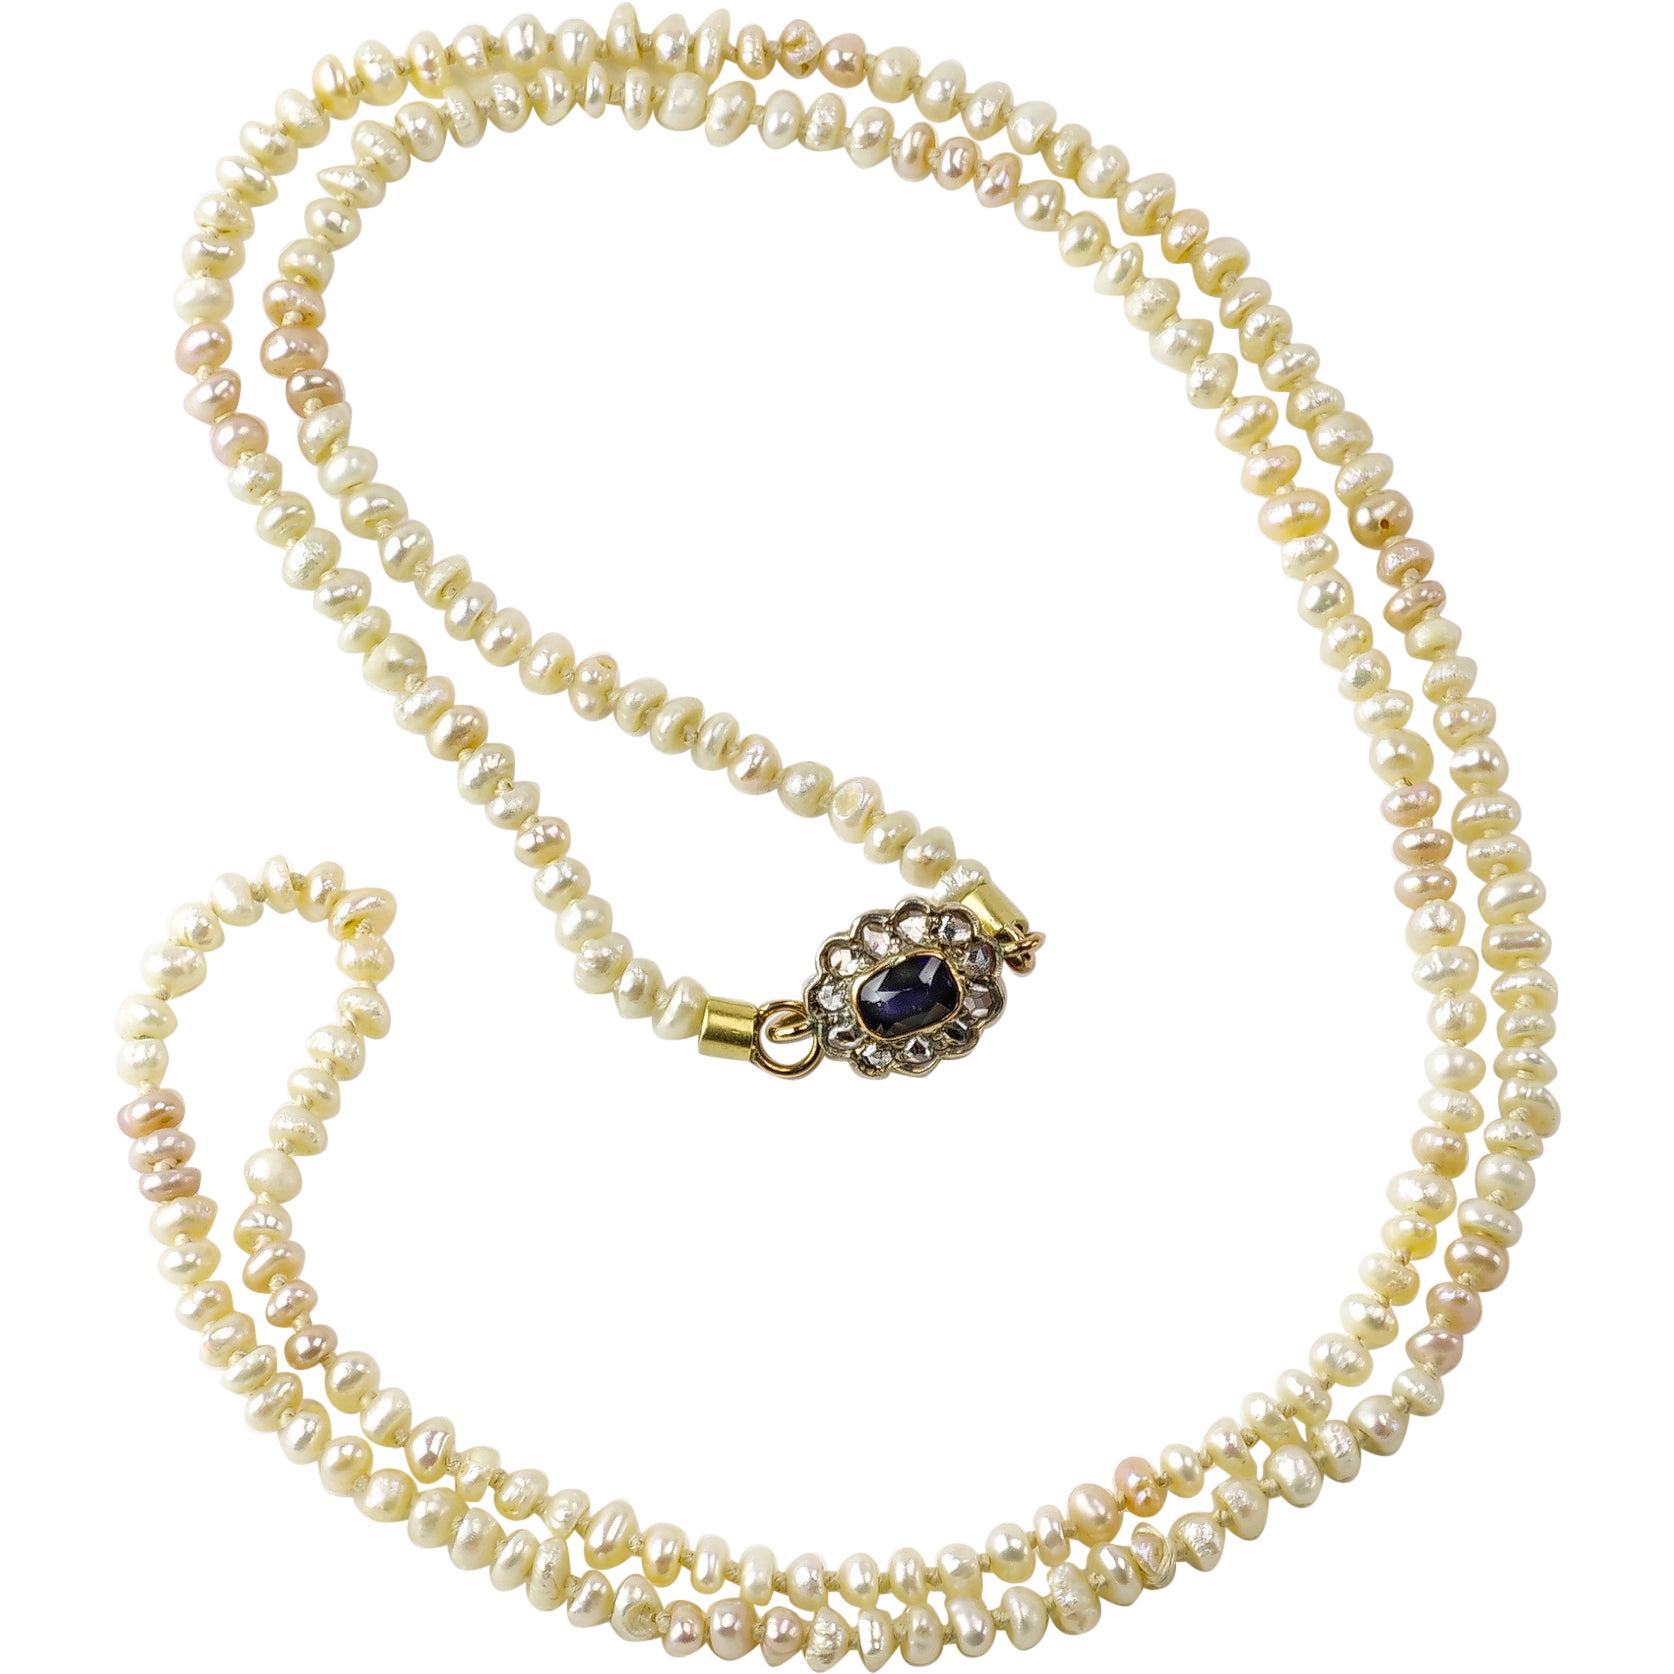 Basra Sea Pearl Necklace with Sapphire and Diamond Clasp